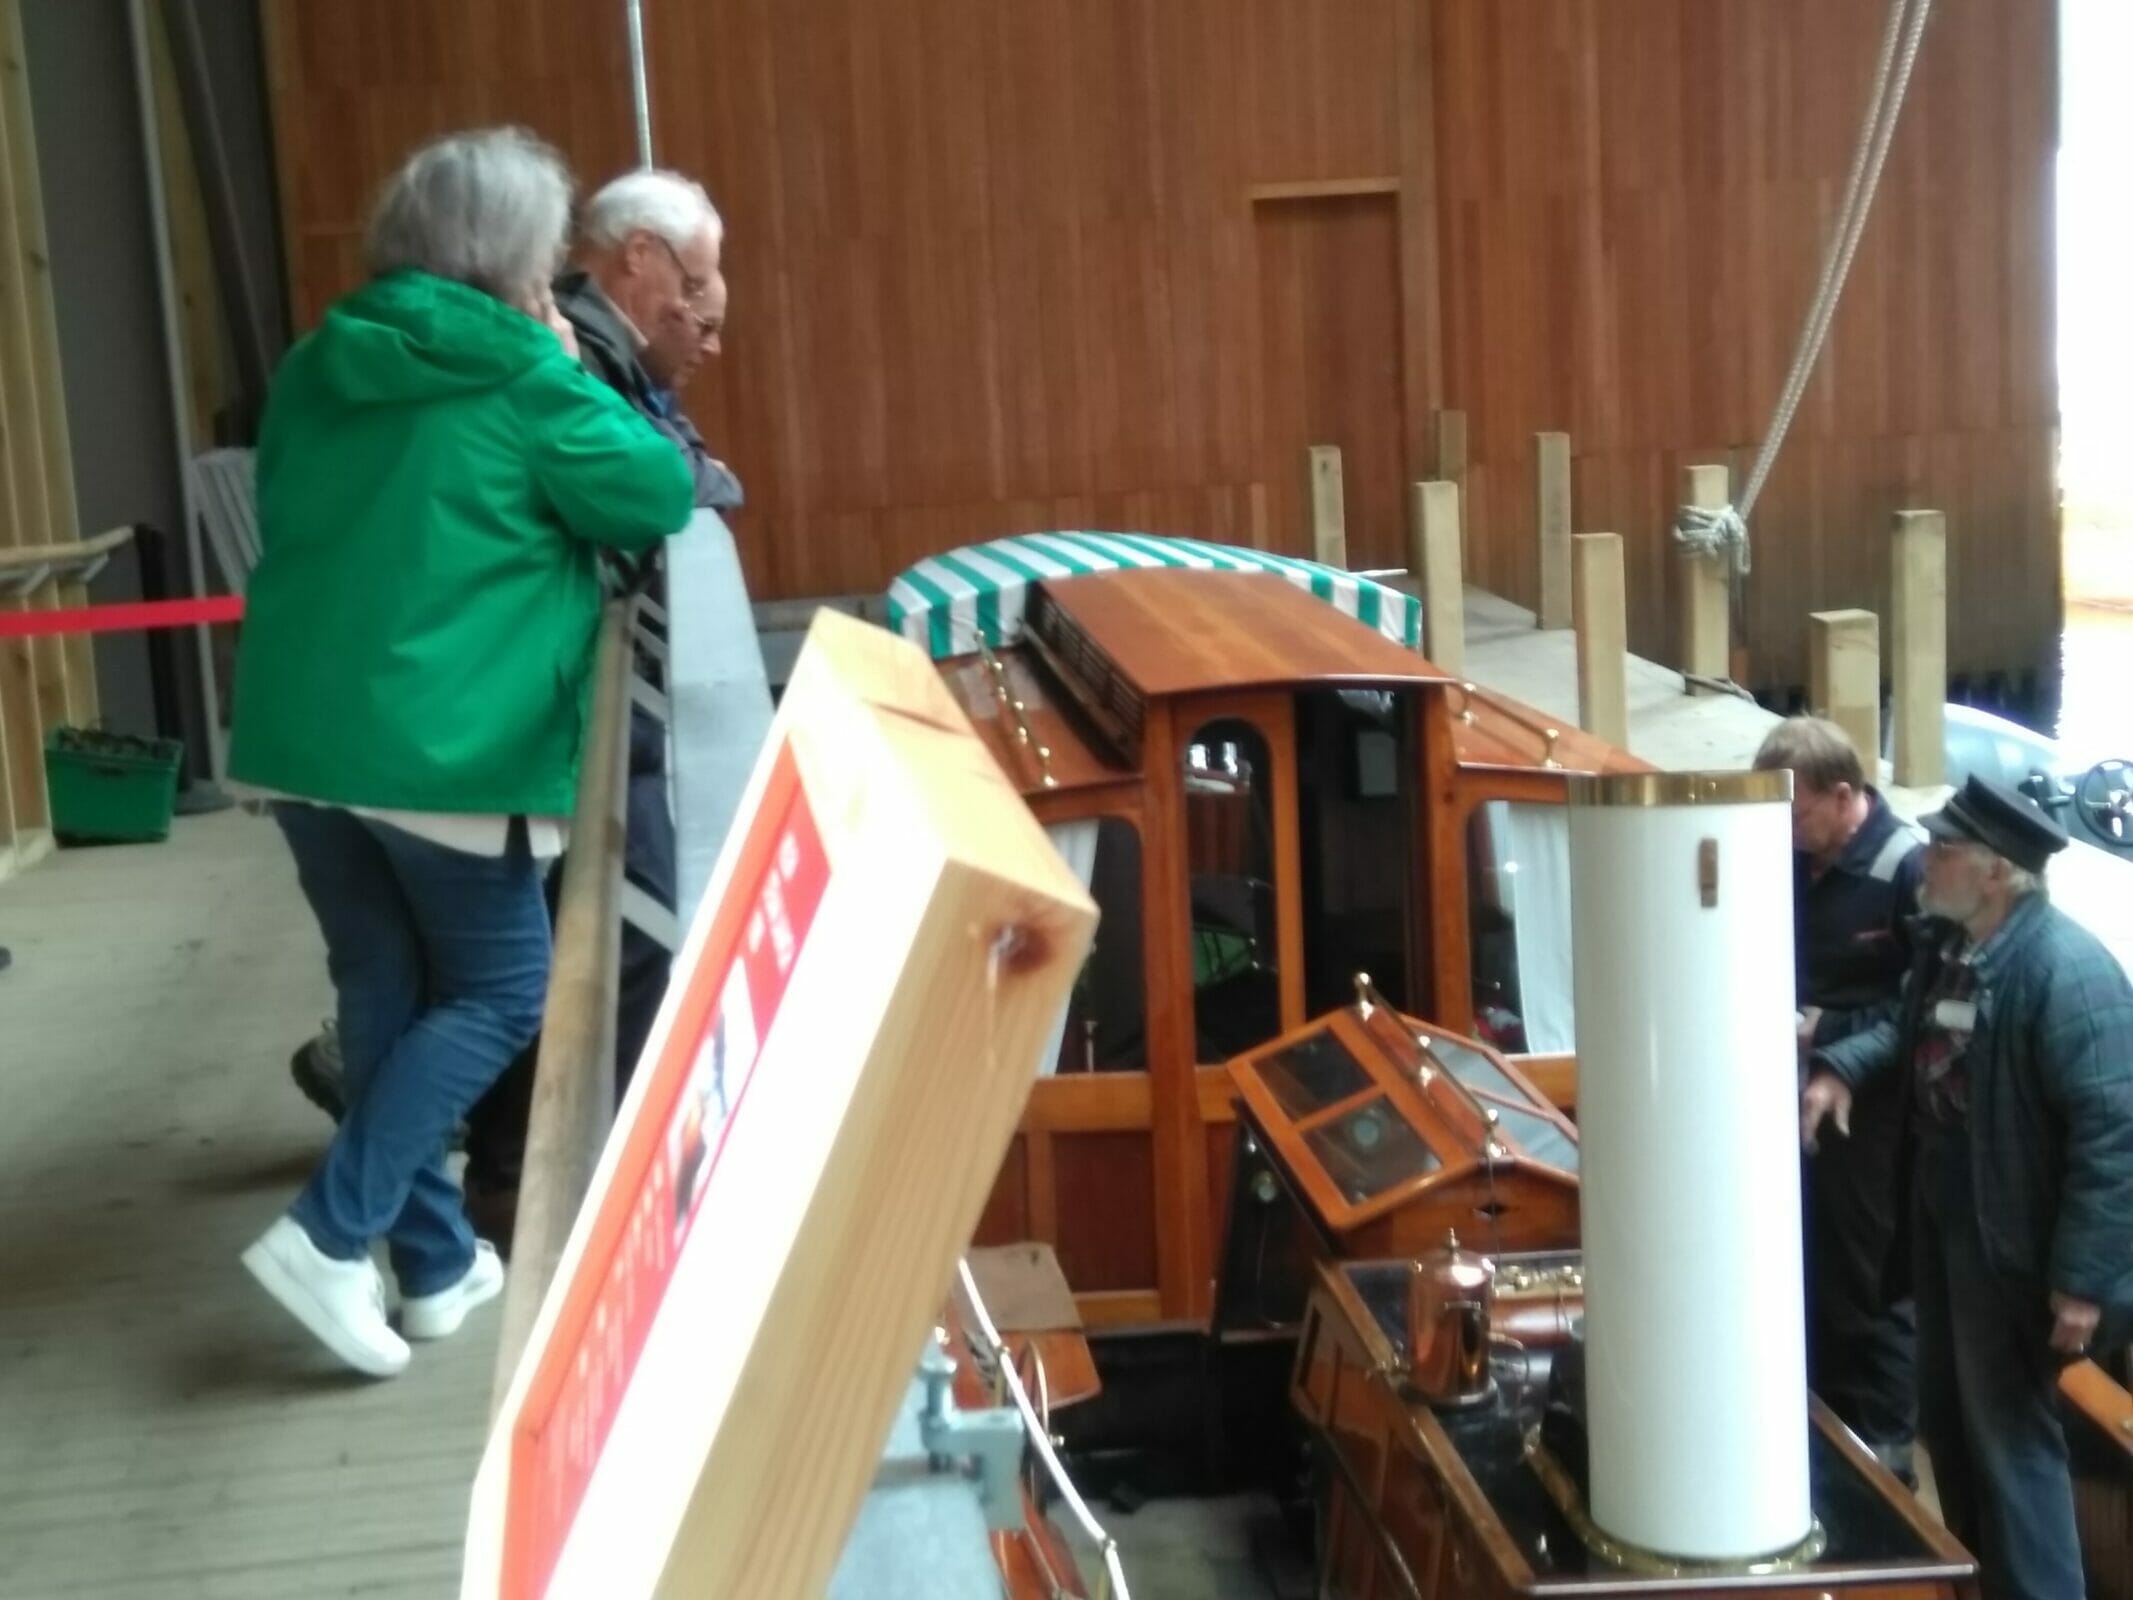 Roger Mallinson, steam engine officianado, rebuilt this Windemere launch and built the steam engine for her.